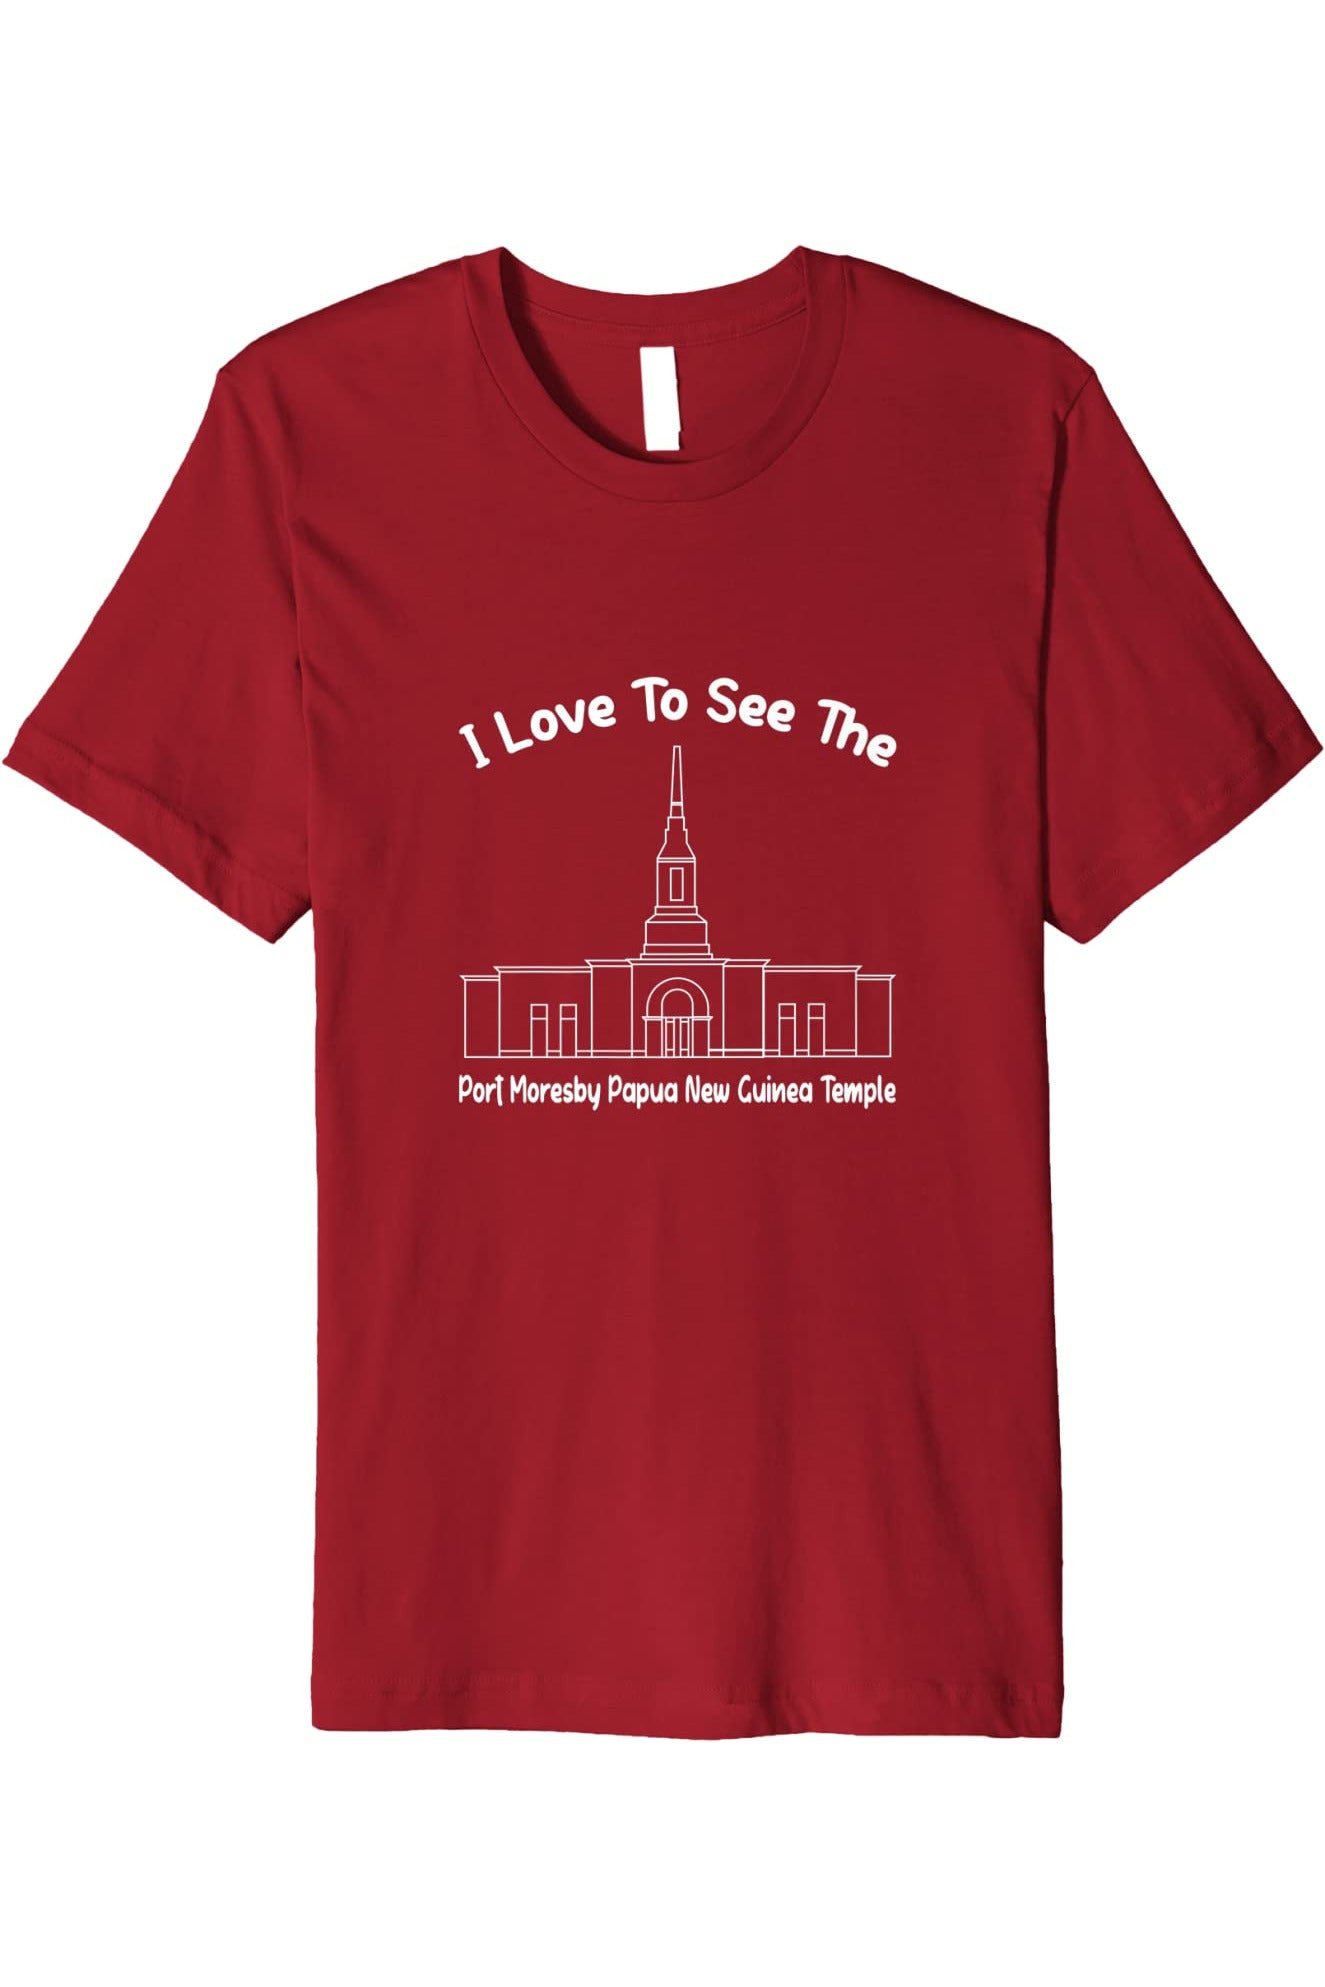 Port Moresby Papua New Guinea Temple T-Shirt - Premium - Primary Style (English) US